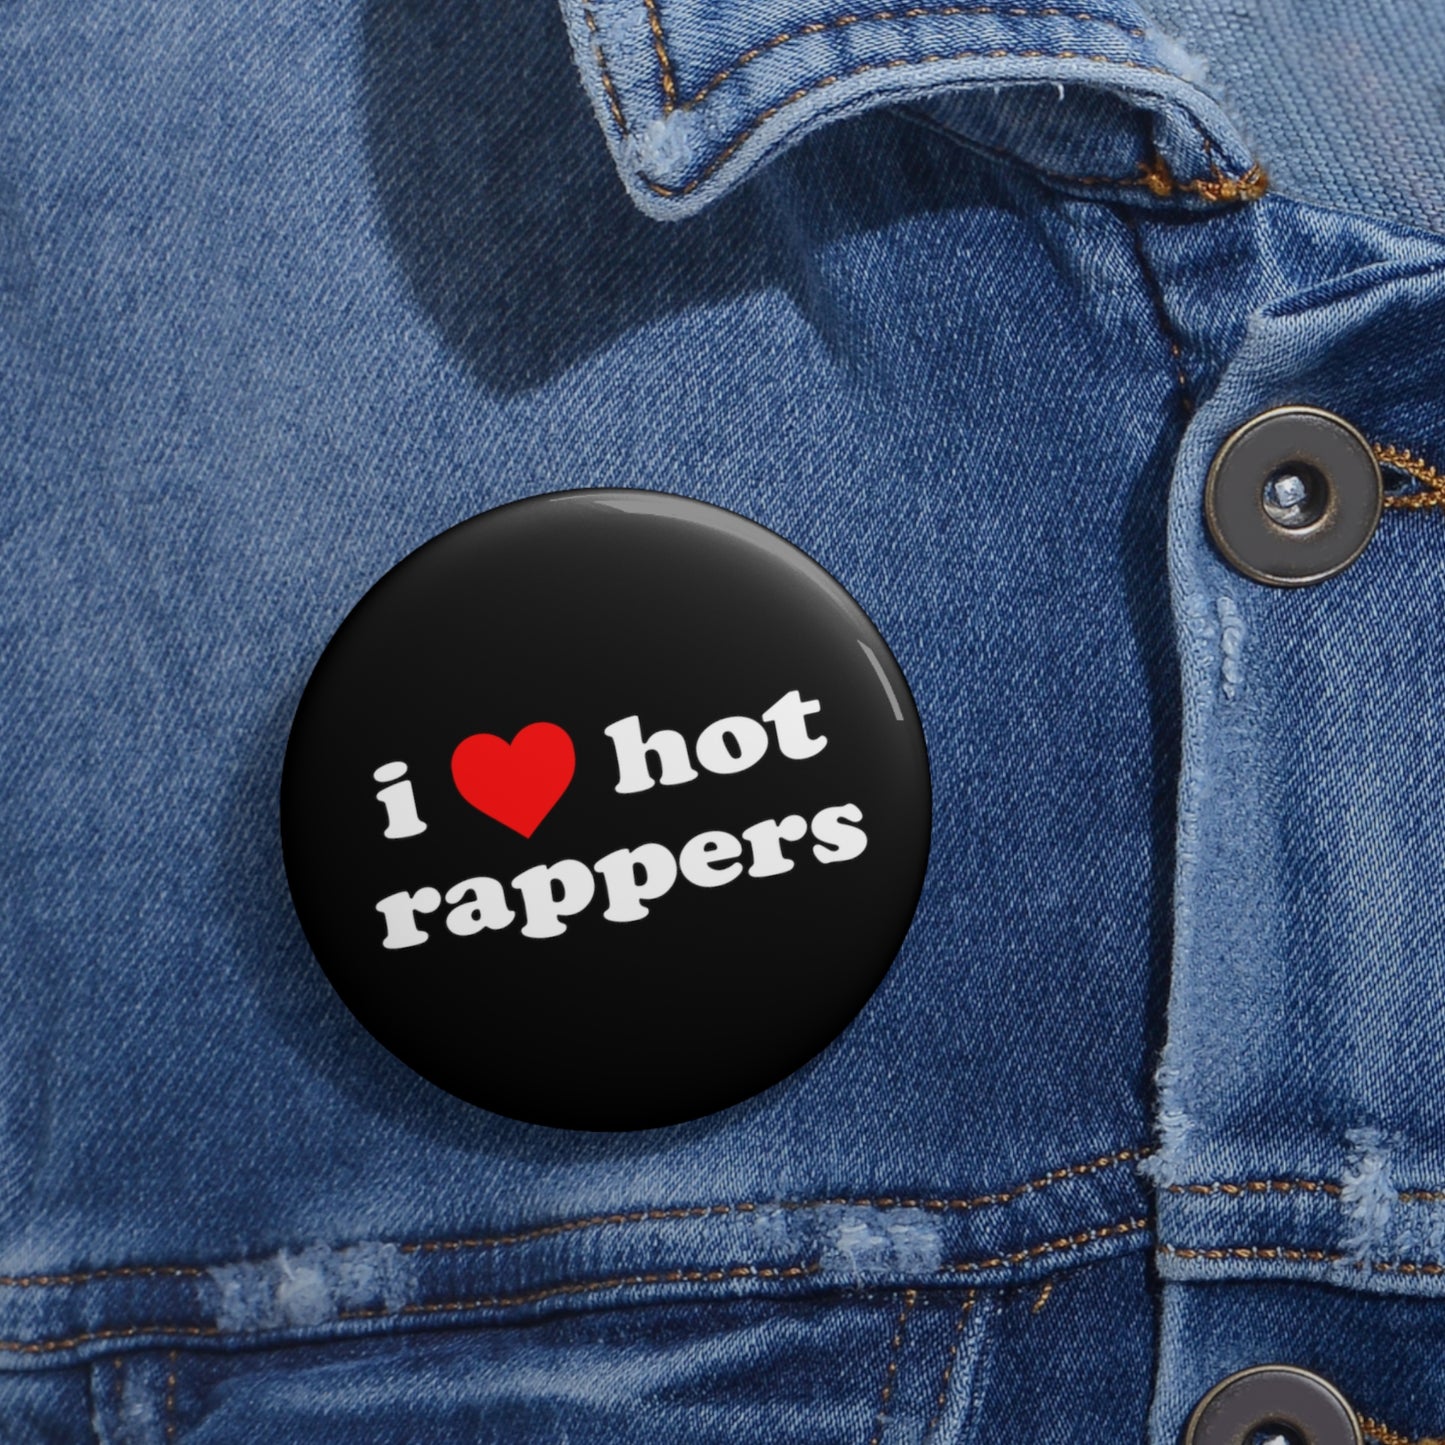 i love hot rappers Black Pin